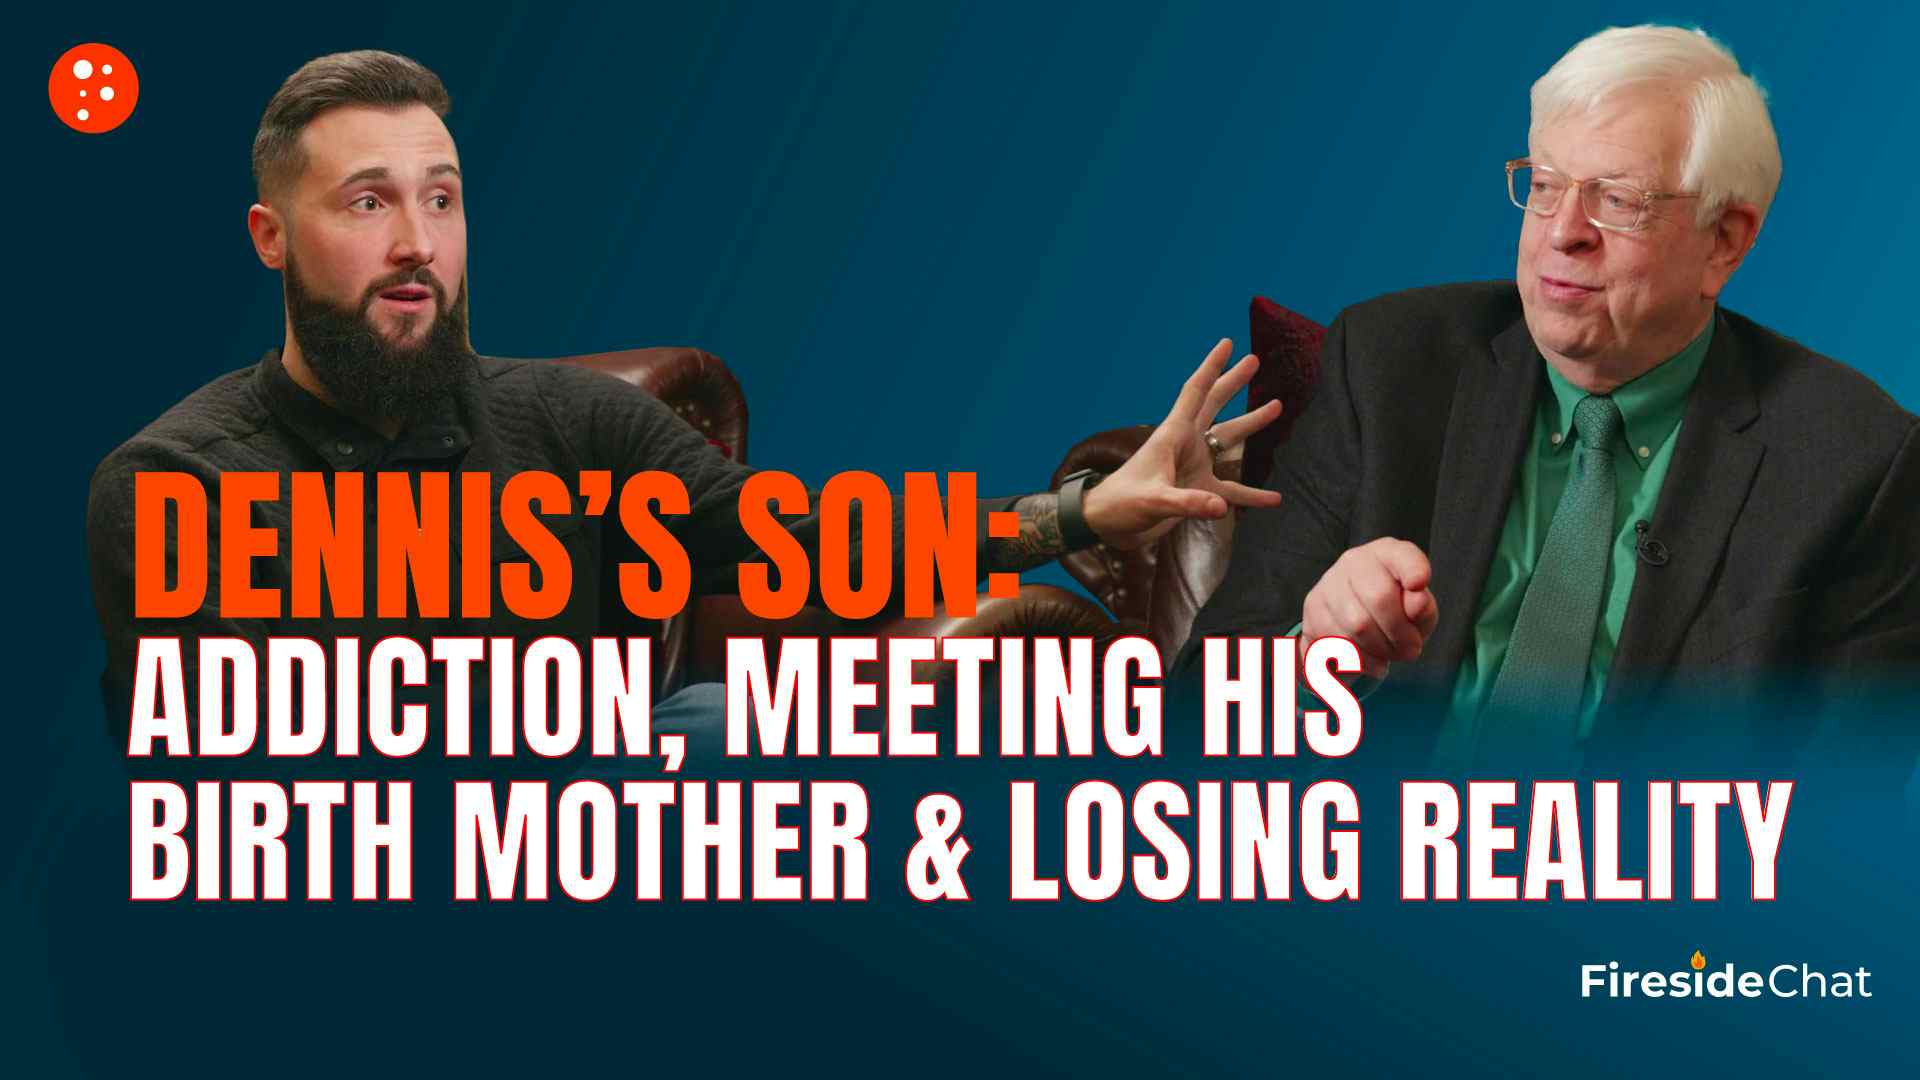 Dennis’s Son: Addiction, Meeting His Birth Mother & Losing Reality